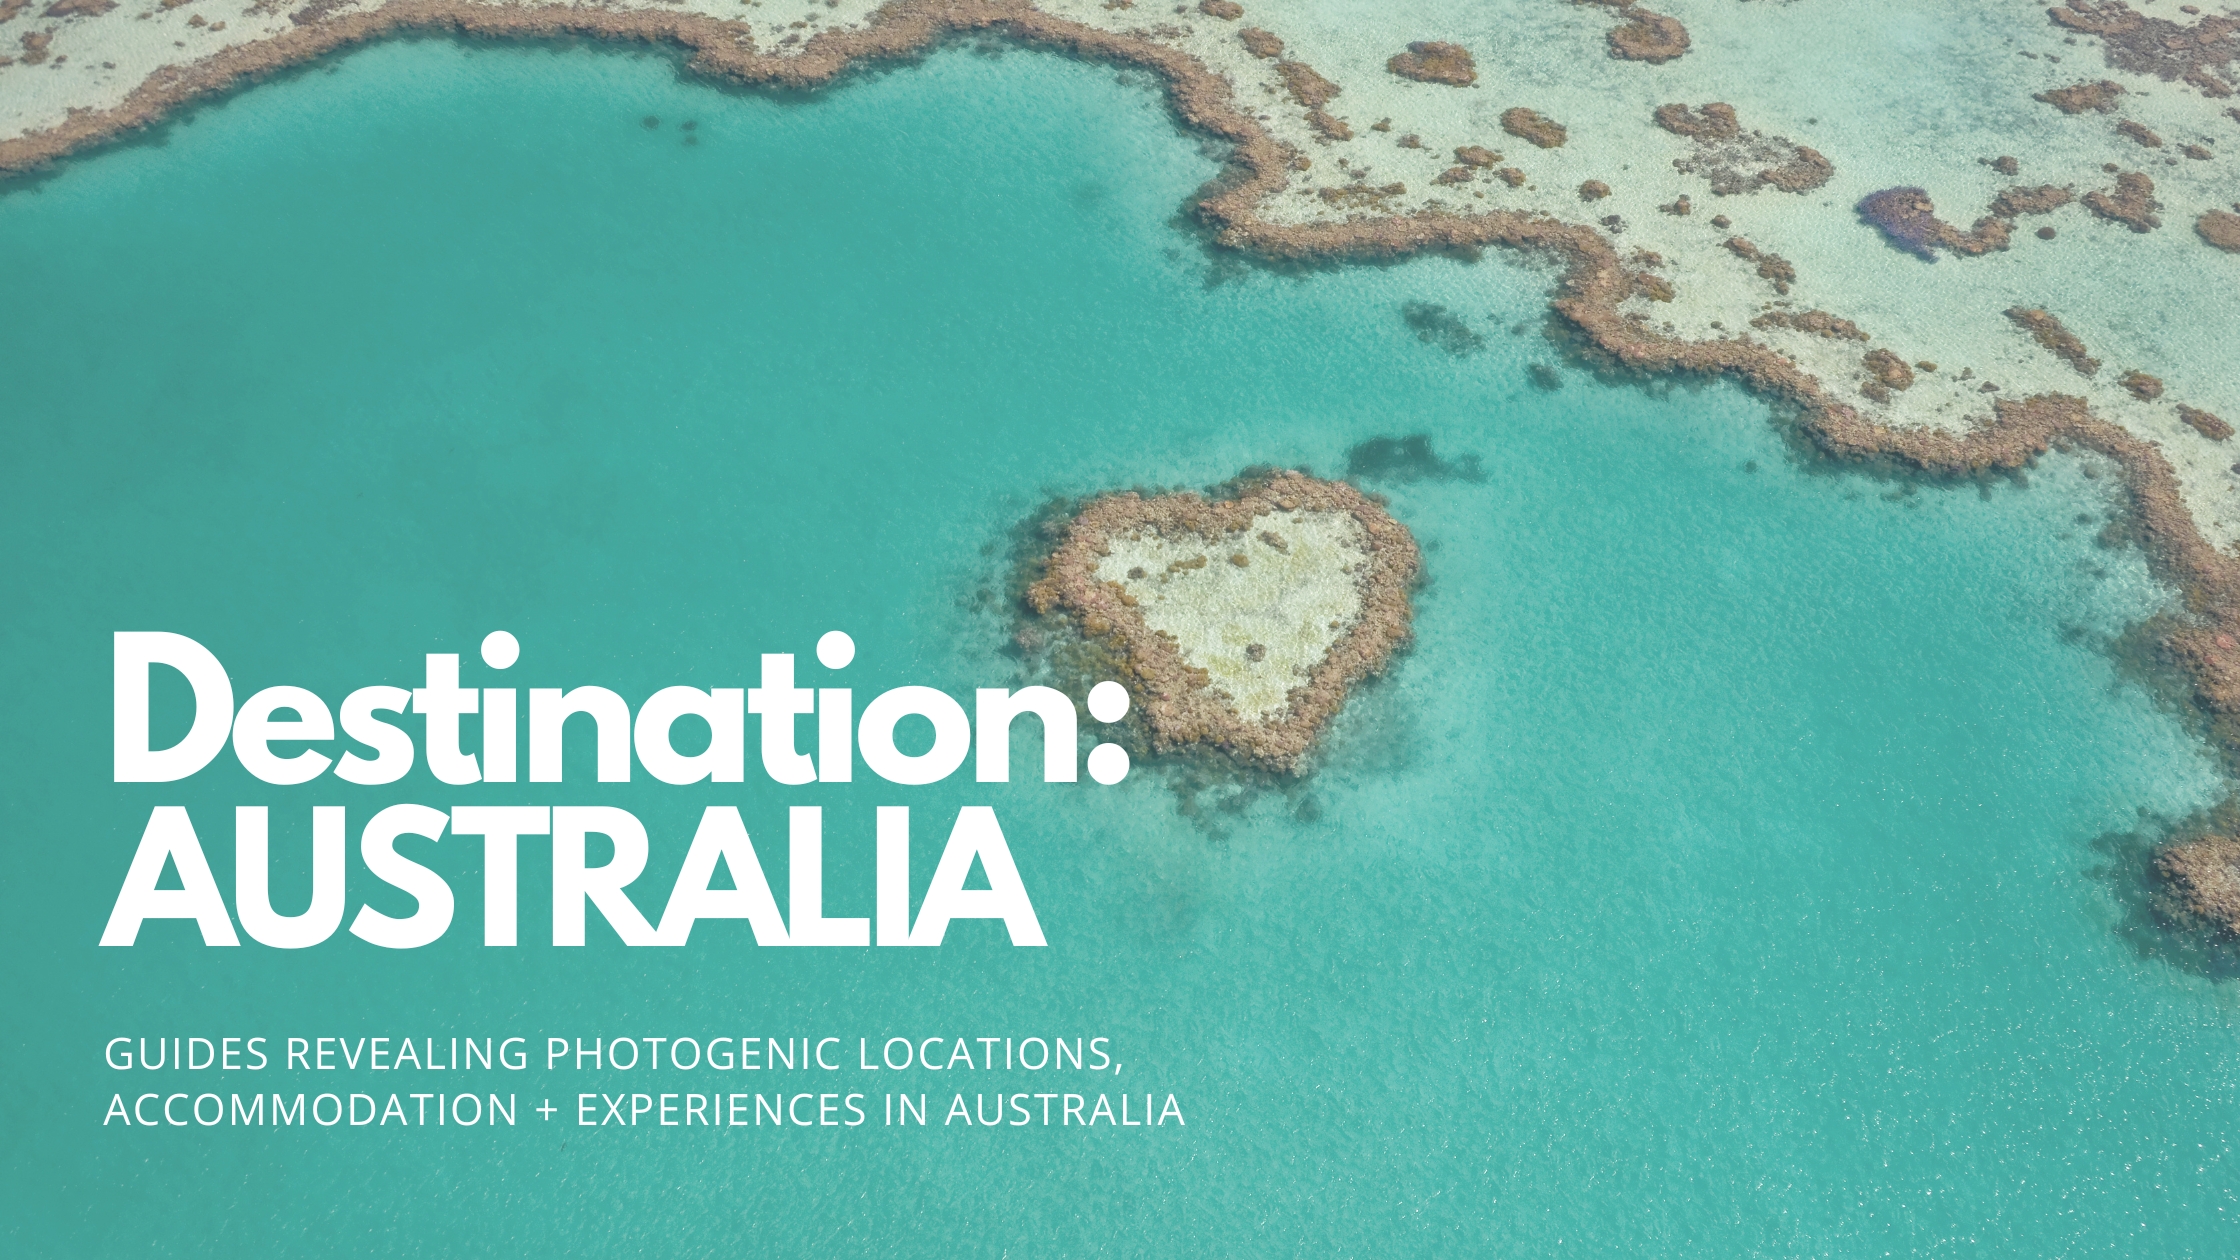 Australian Travel Tips and Photography Locations